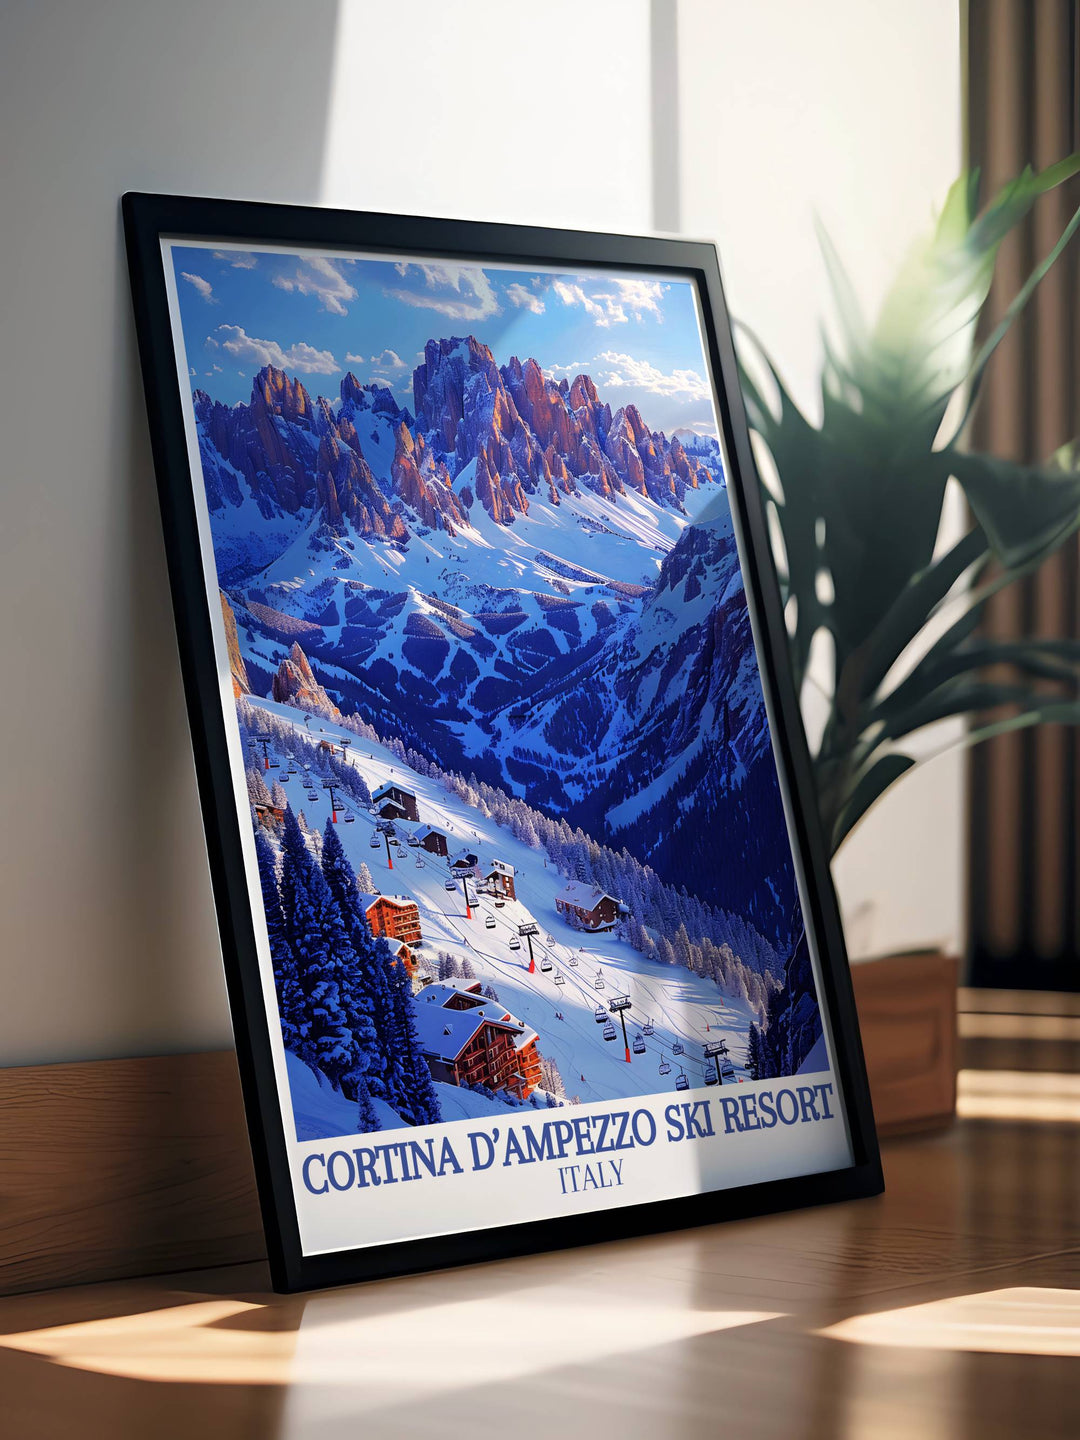 Snowy landscape of Tofana featuring skiers enjoying the slopes, ideal for a ski resort themed home decor